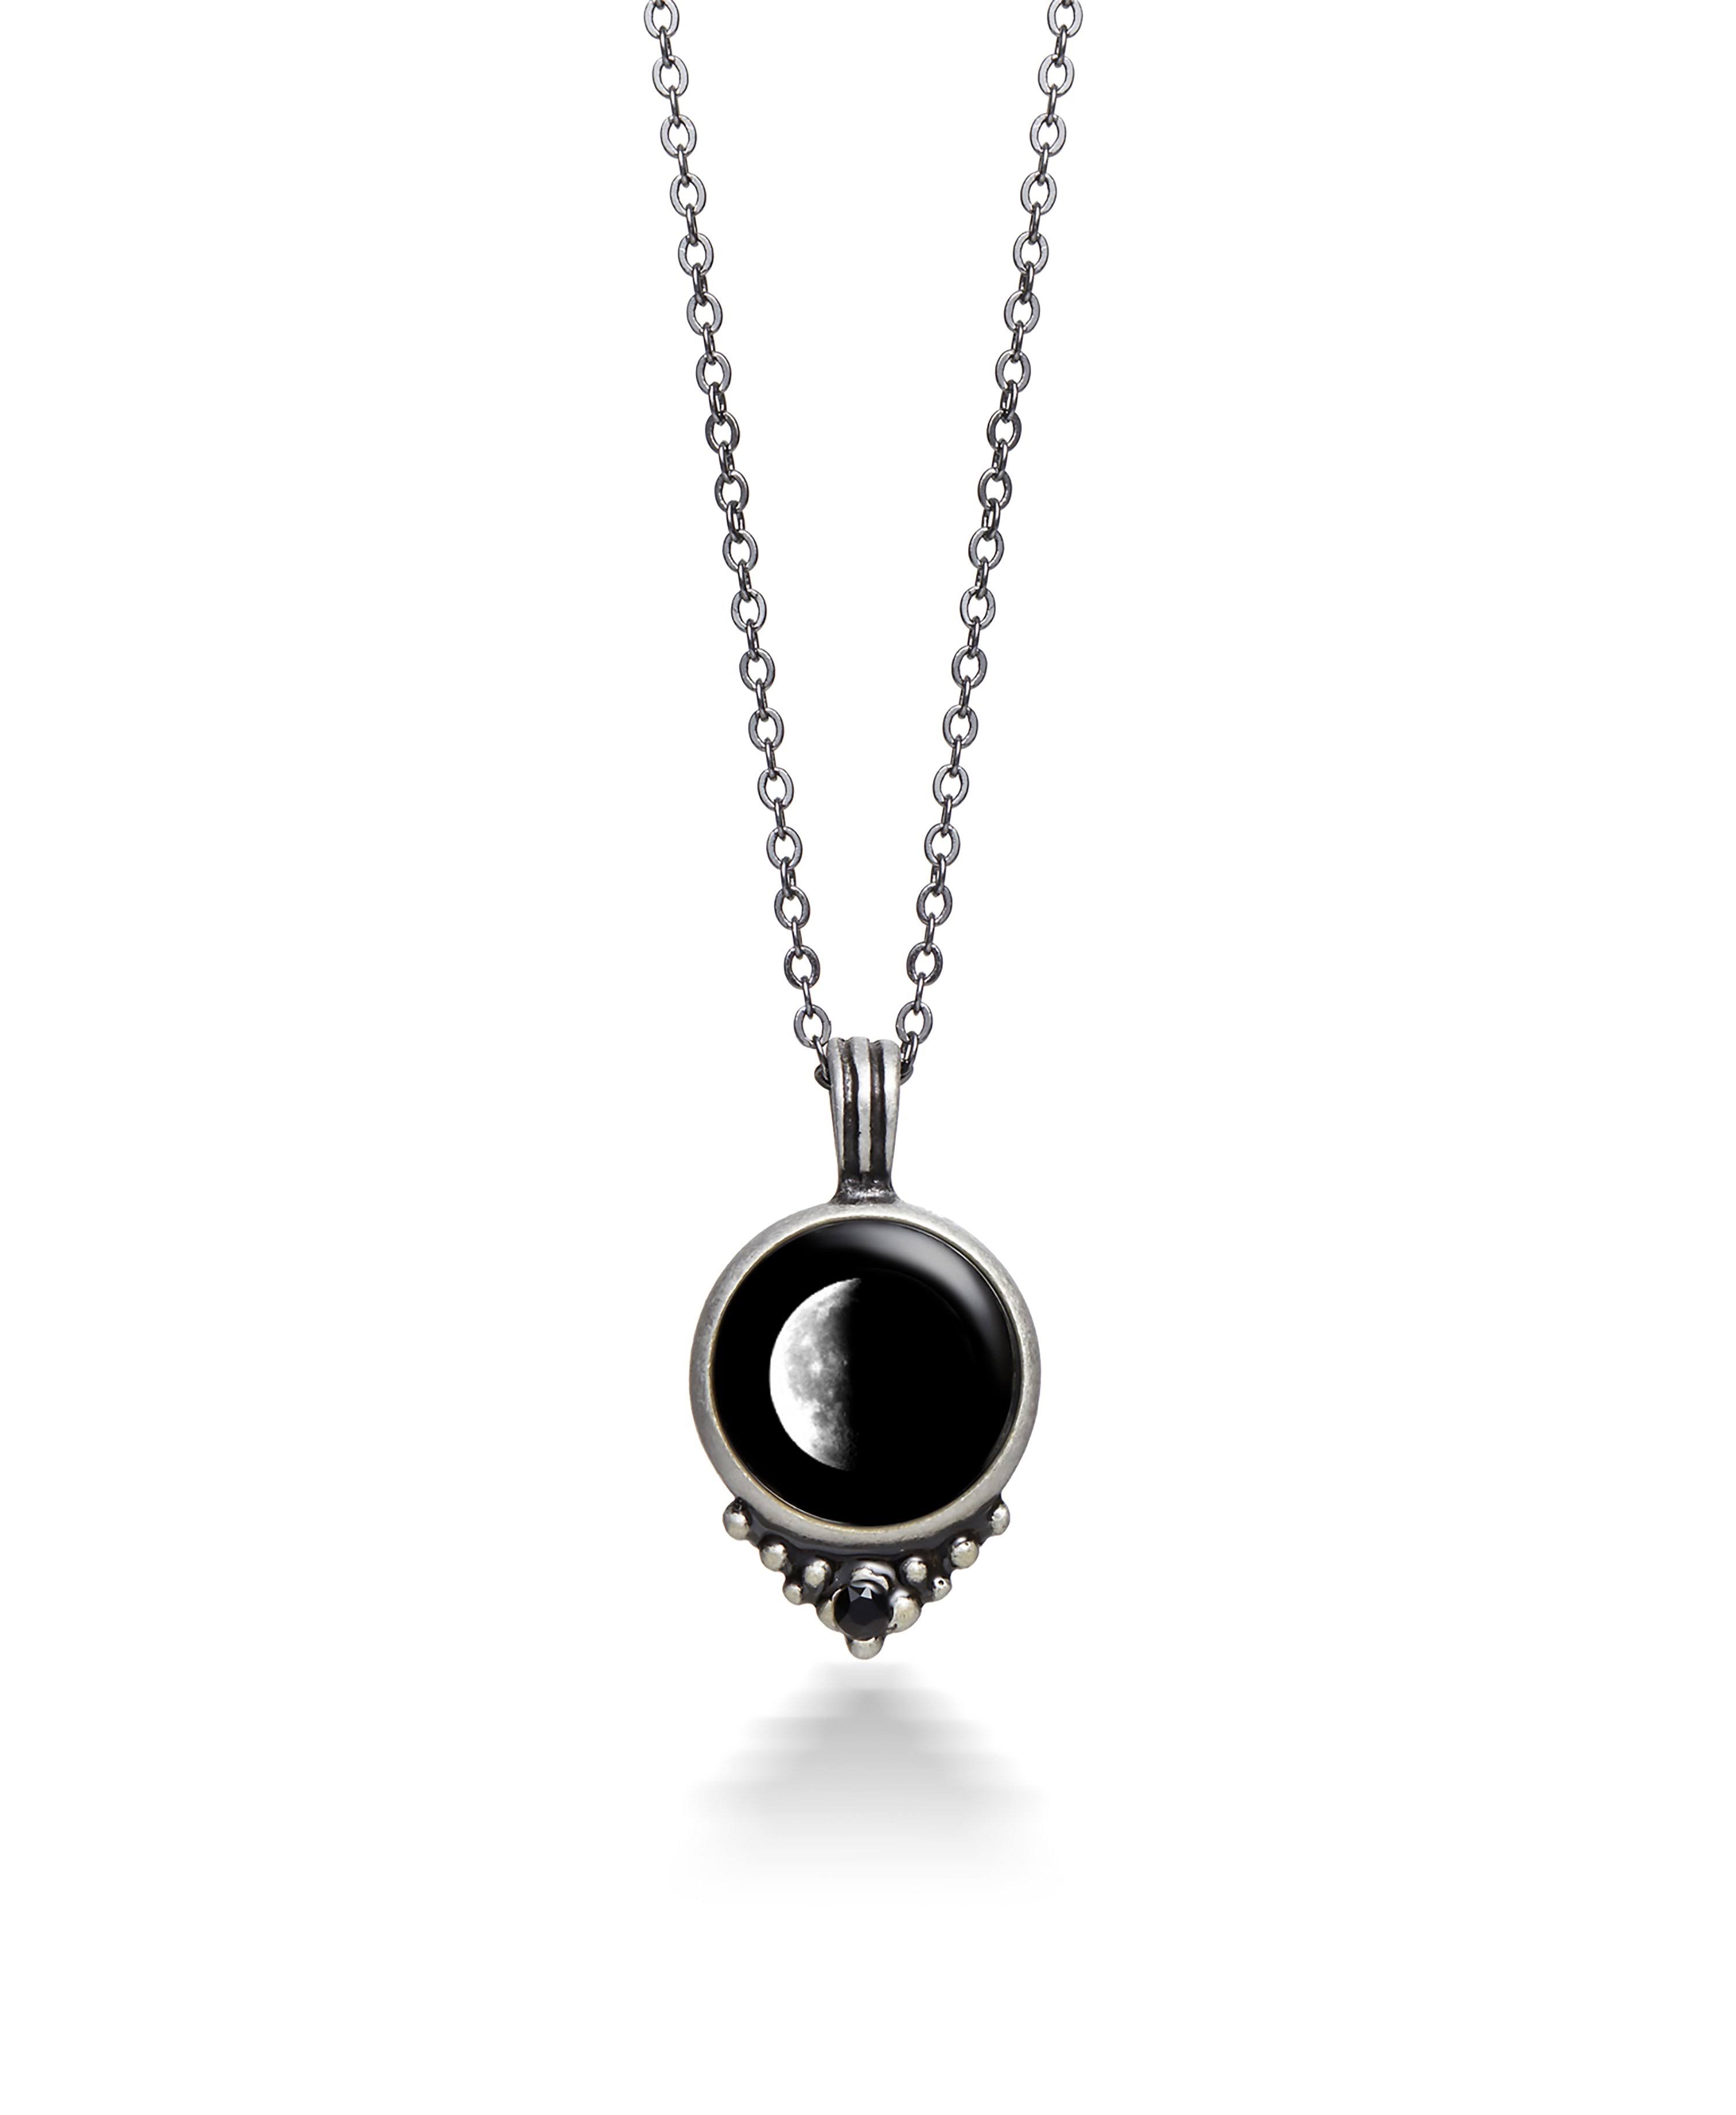 Moonglow Pewter Necklace 3D